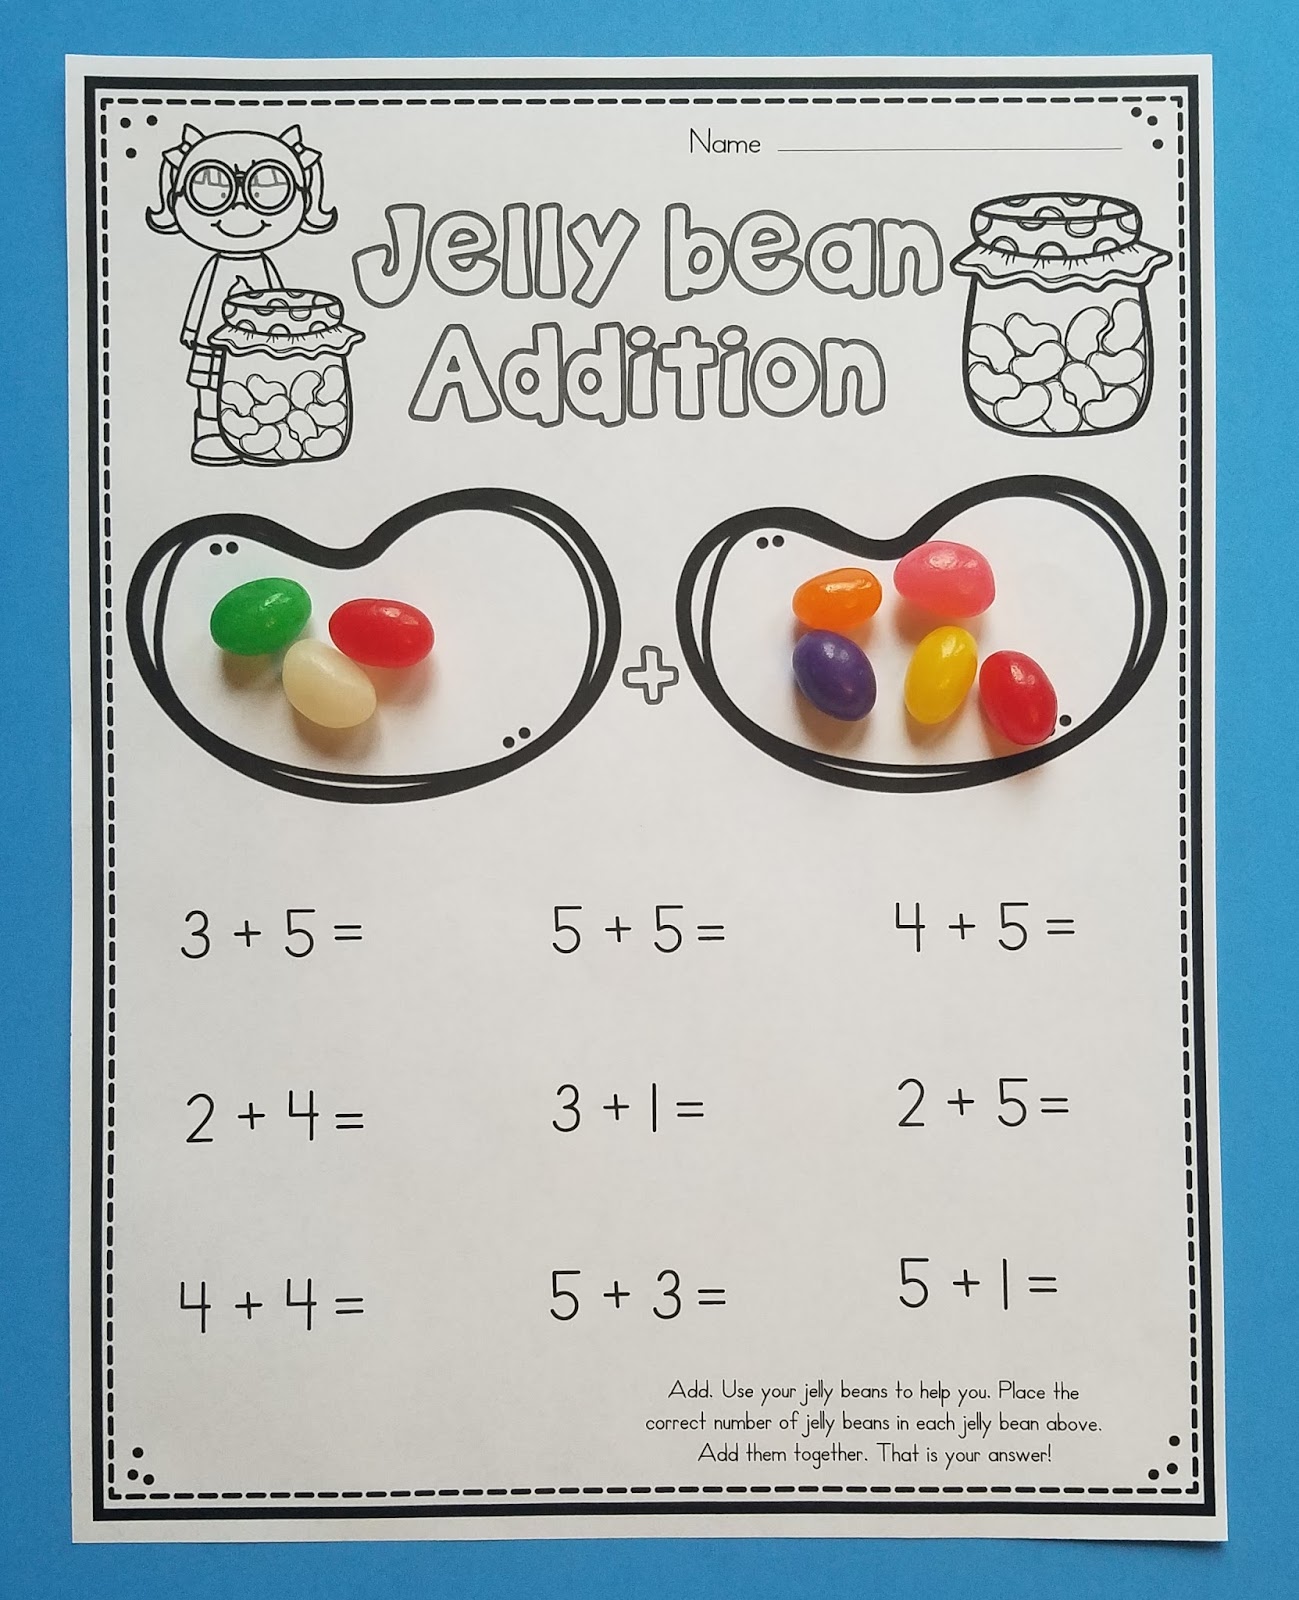 color-the-jelly-beans-color-and-tally-printable-worksheets-in-2021-jelly-beans-crafts